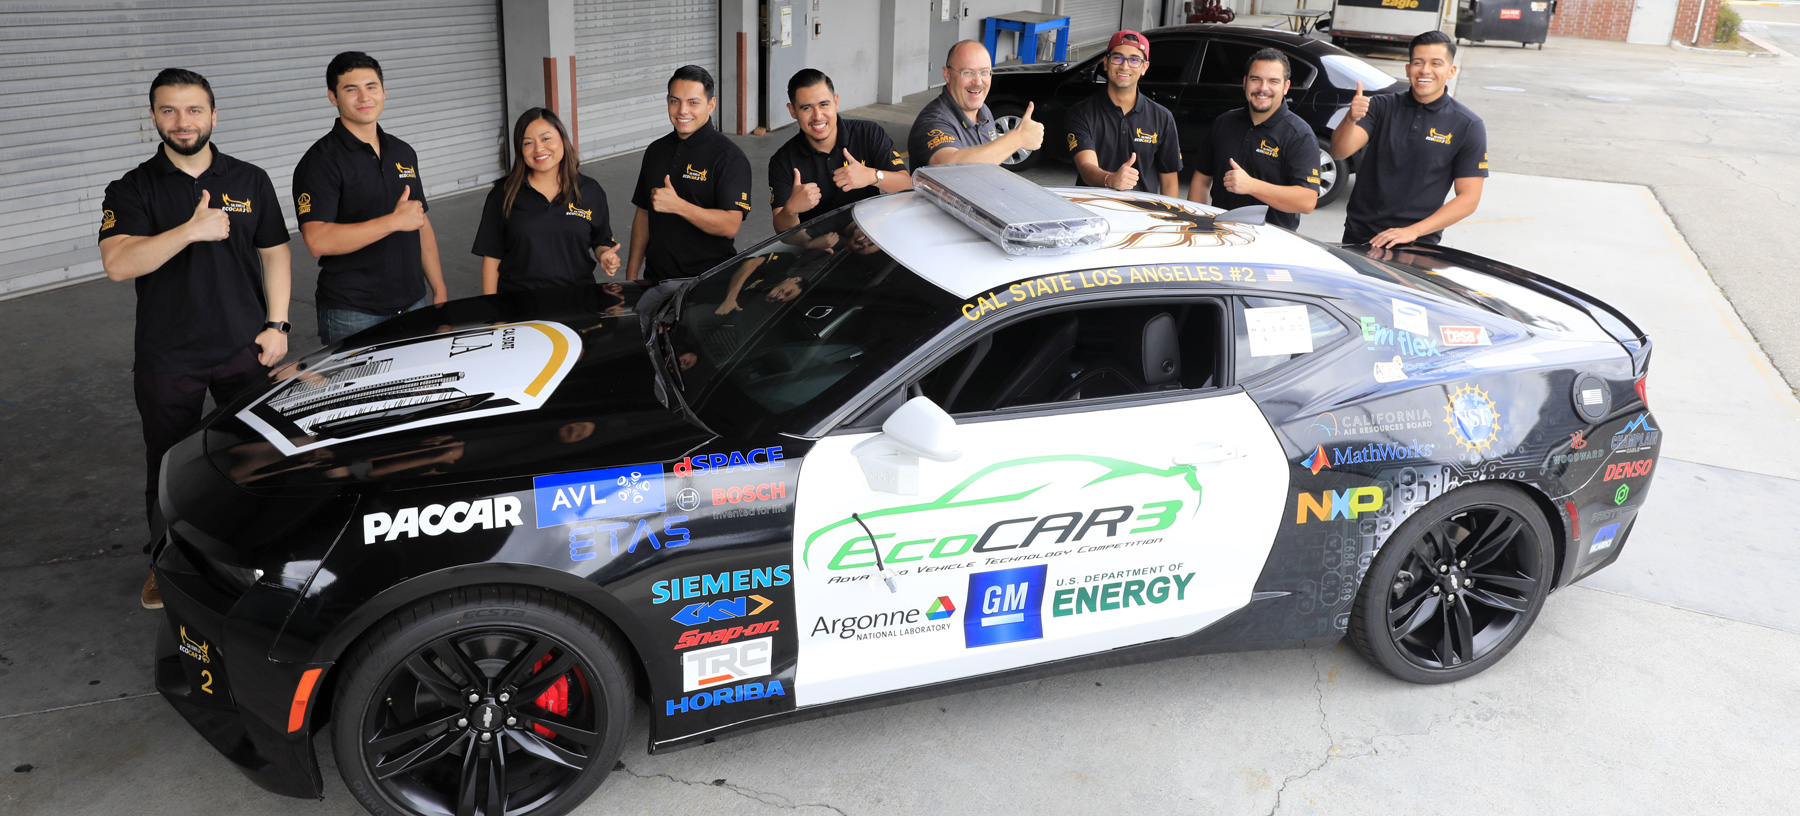 Dr. David Blekhman with the EcoCAR3 team and their Chevrolet Camaro.